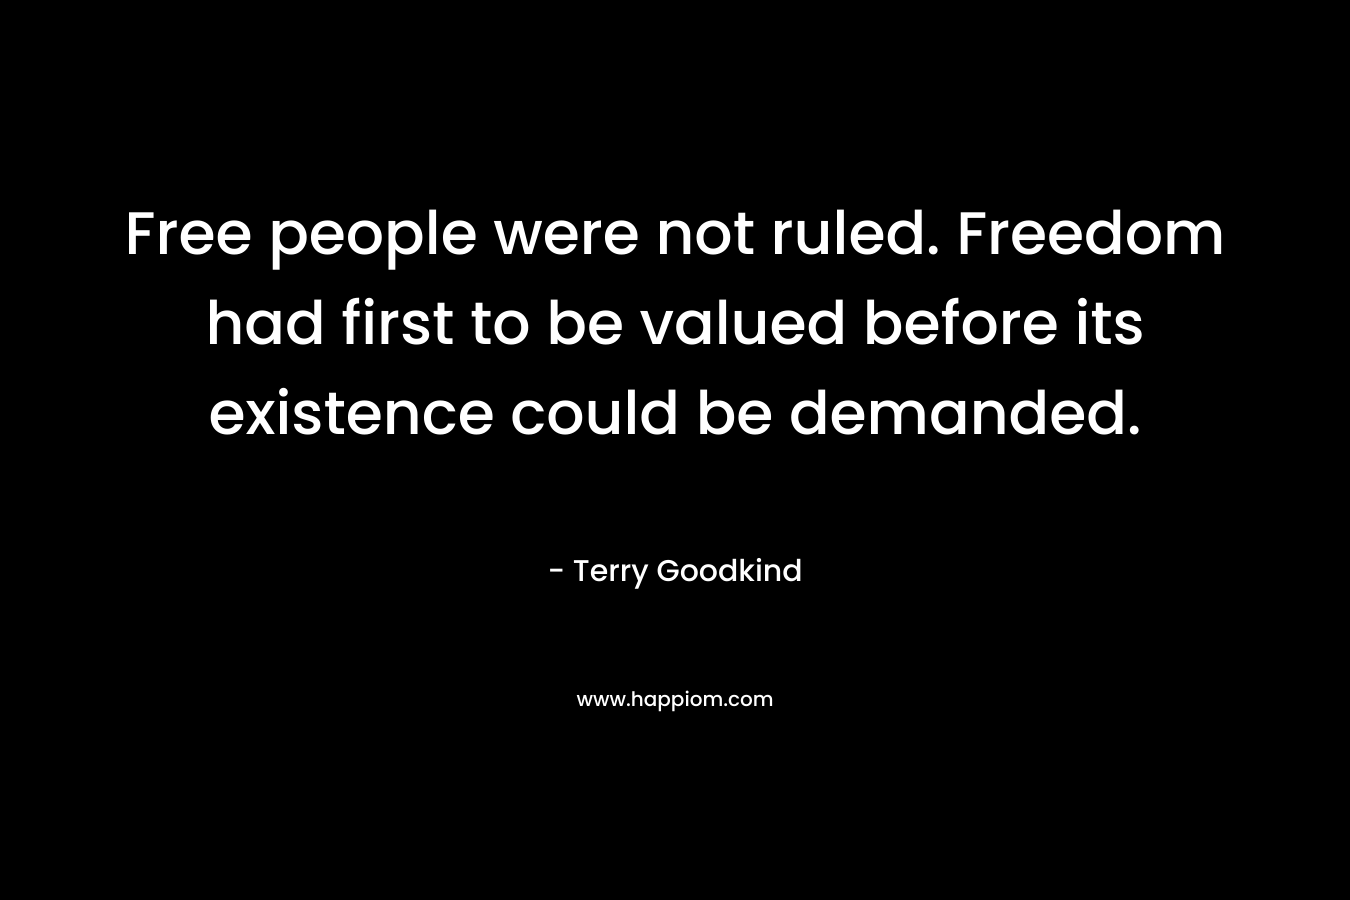 Free people were not ruled. Freedom had first to be valued before its existence could be demanded. – Terry Goodkind